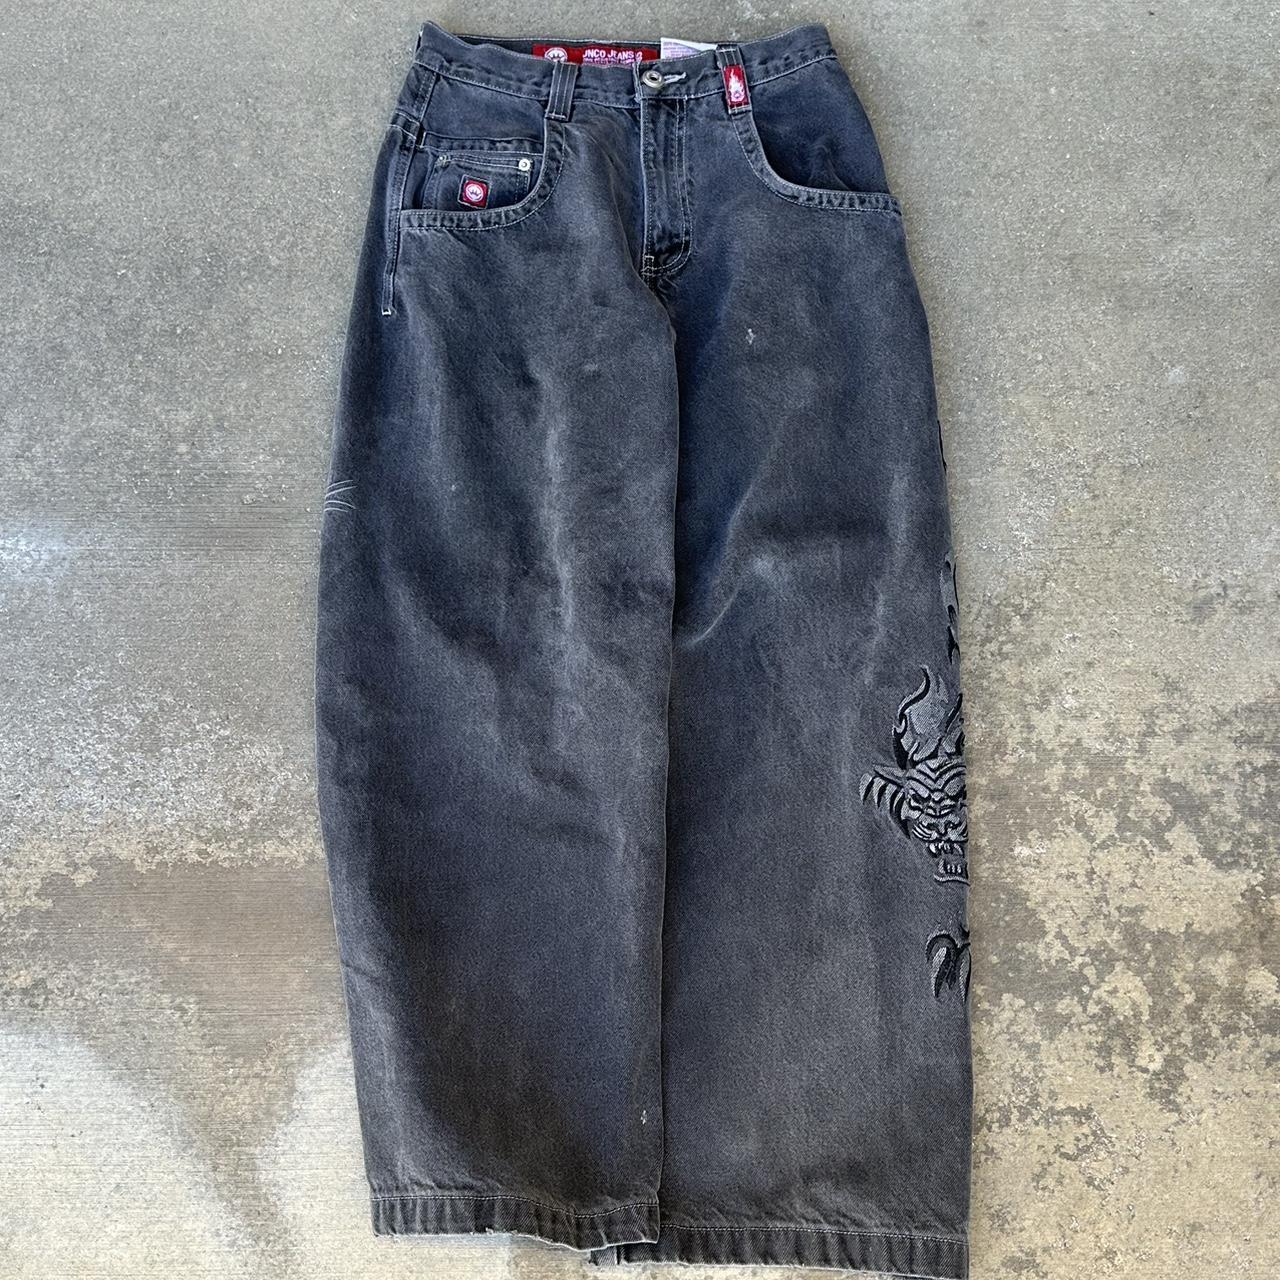 [SOLD] GRAIL JNCO TIGER TRIBALS 90s Jeans THIS... - Depop